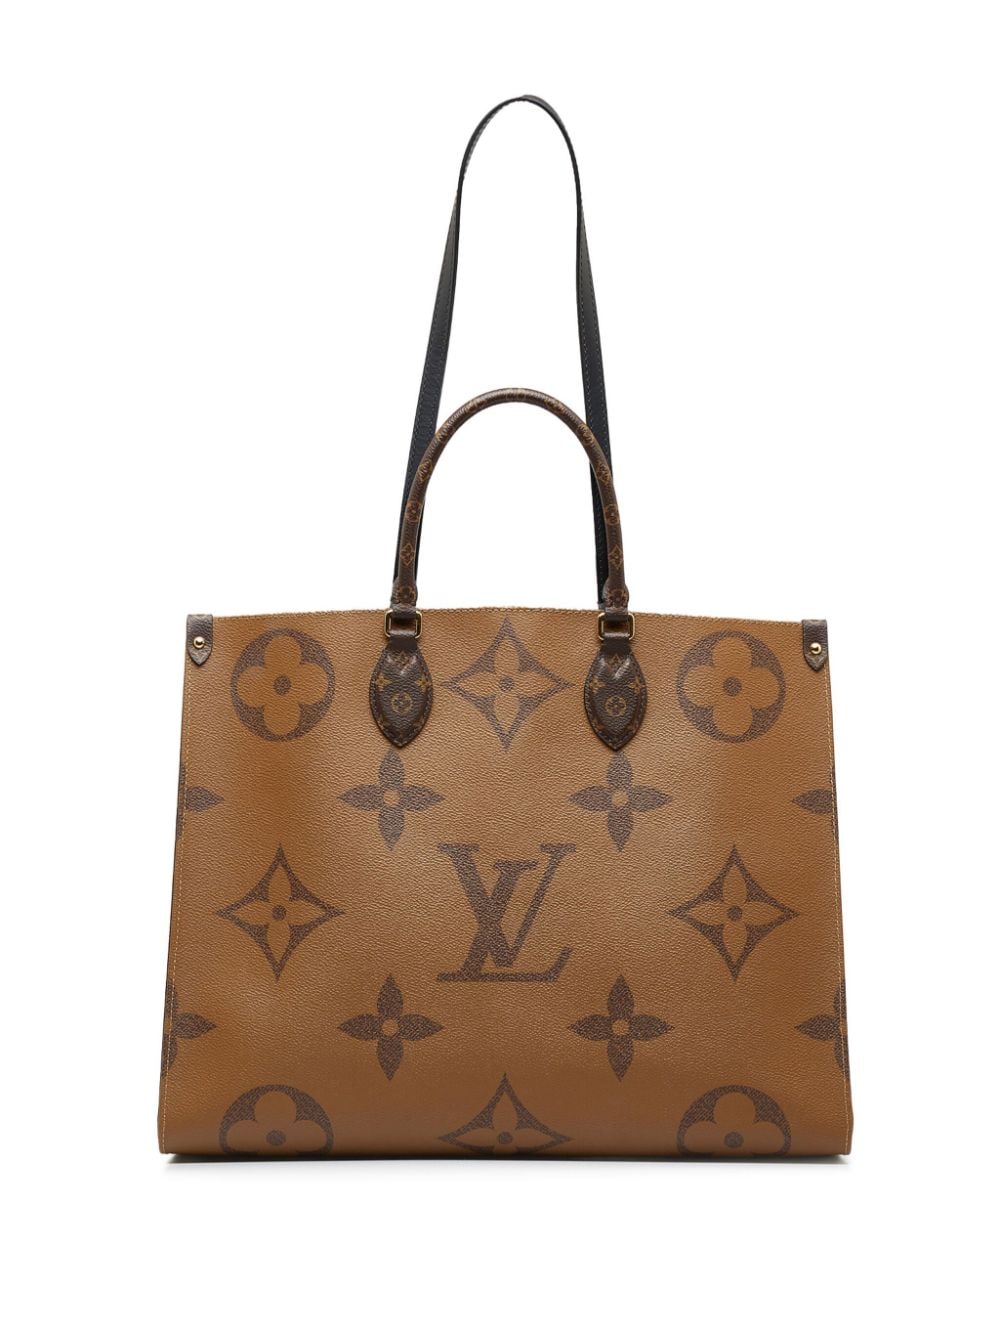 Louis Vuitton 2020 pre-owned OnTheGo GM tote bag - Bruin